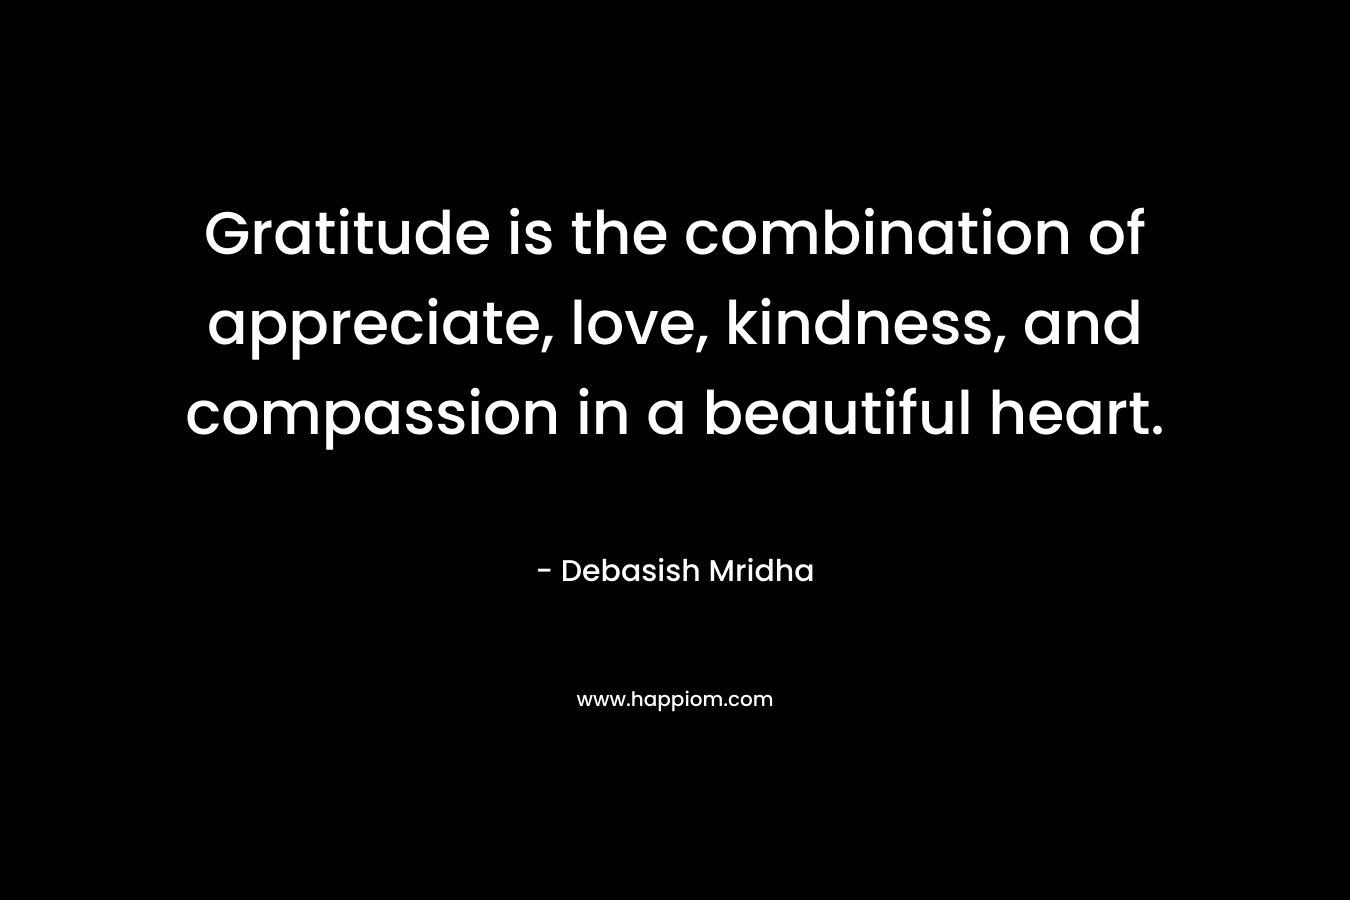 Gratitude is the combination of appreciate, love, kindness, and compassion in a beautiful heart.